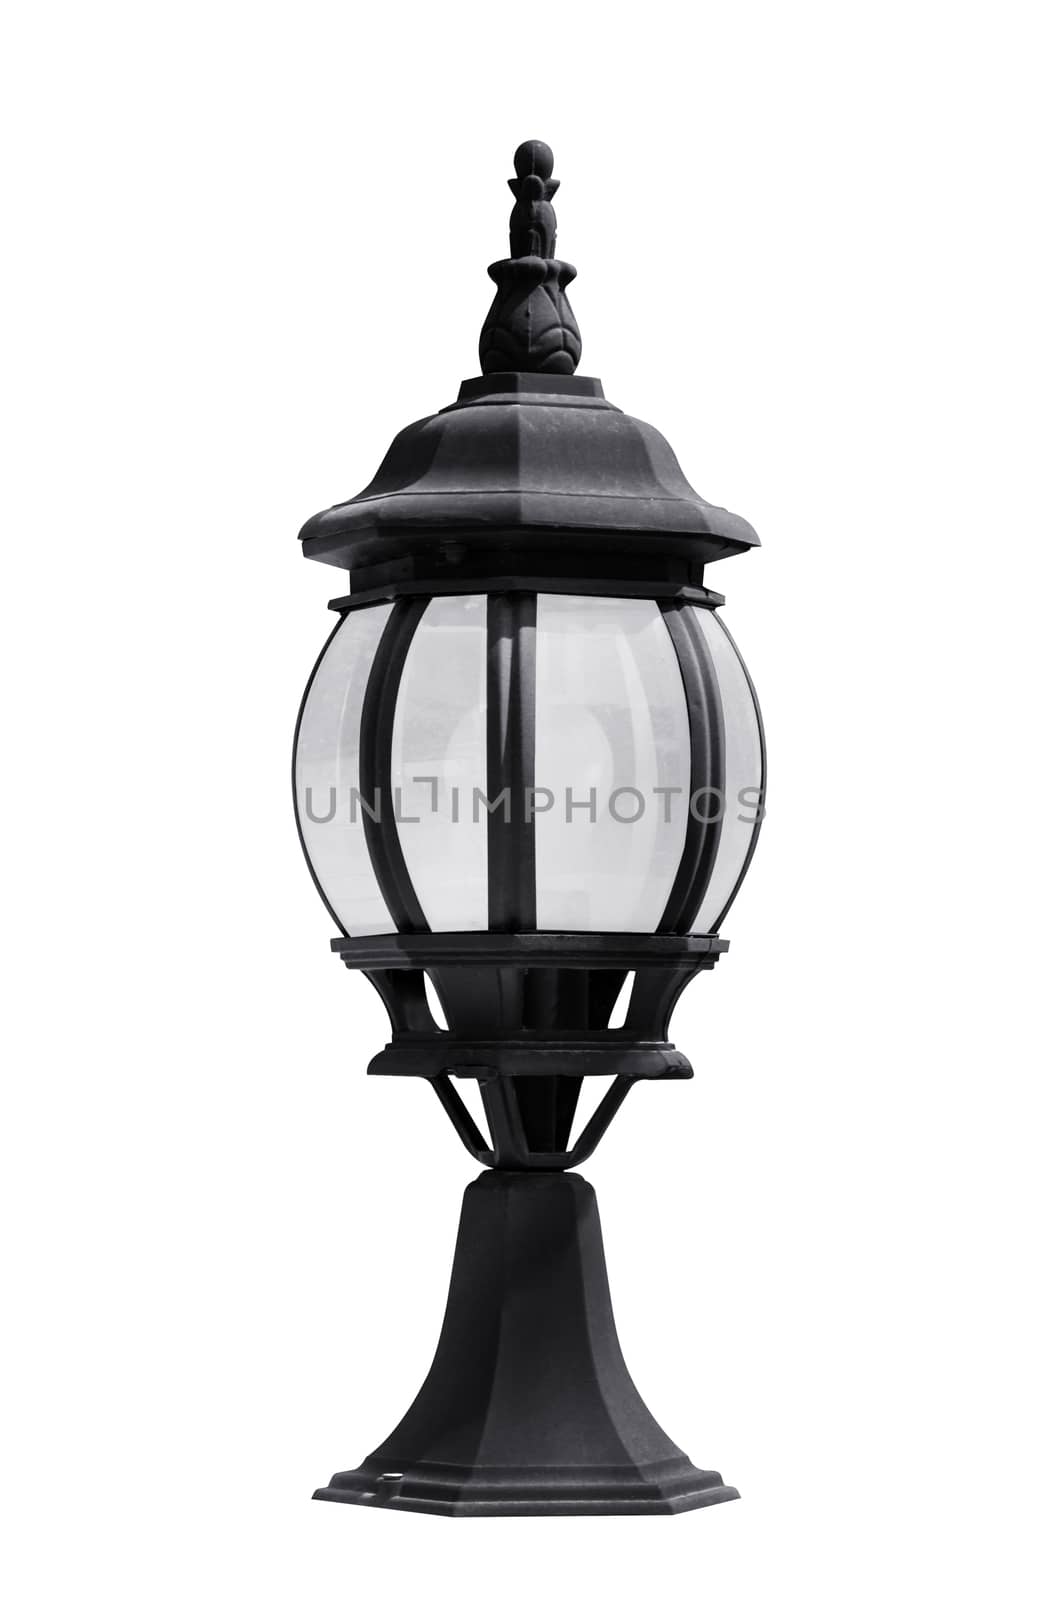 Lantern isolated on white with clipping path 